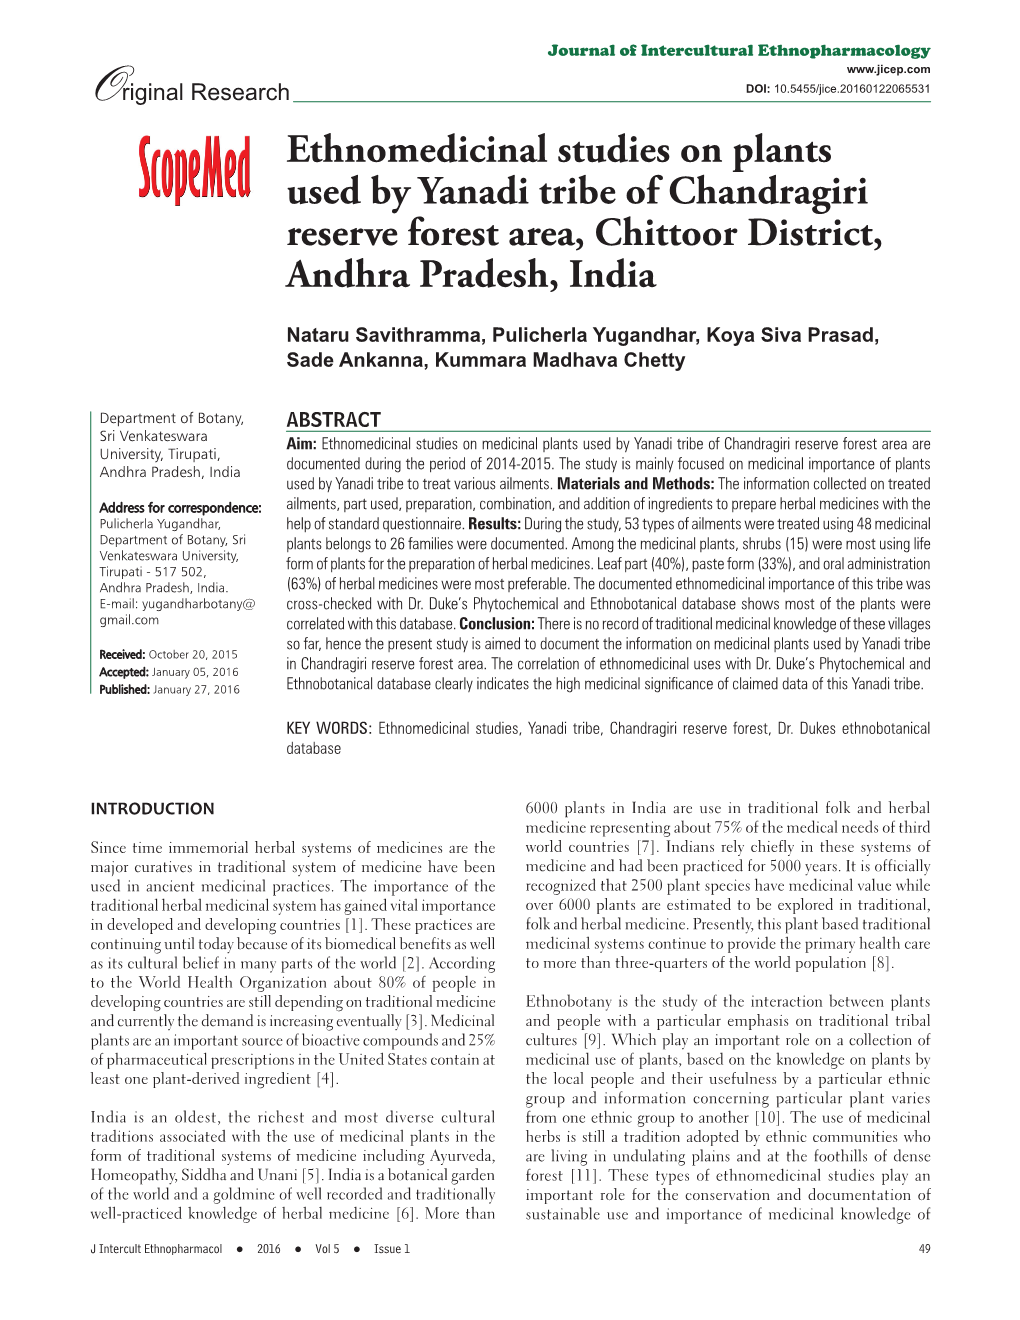 Ethnomedicinal Studies on Plants Used by Yanadi Tribe of Chandragiri Reserve Forest Area, Chittoor District, Andhra Pradesh, India